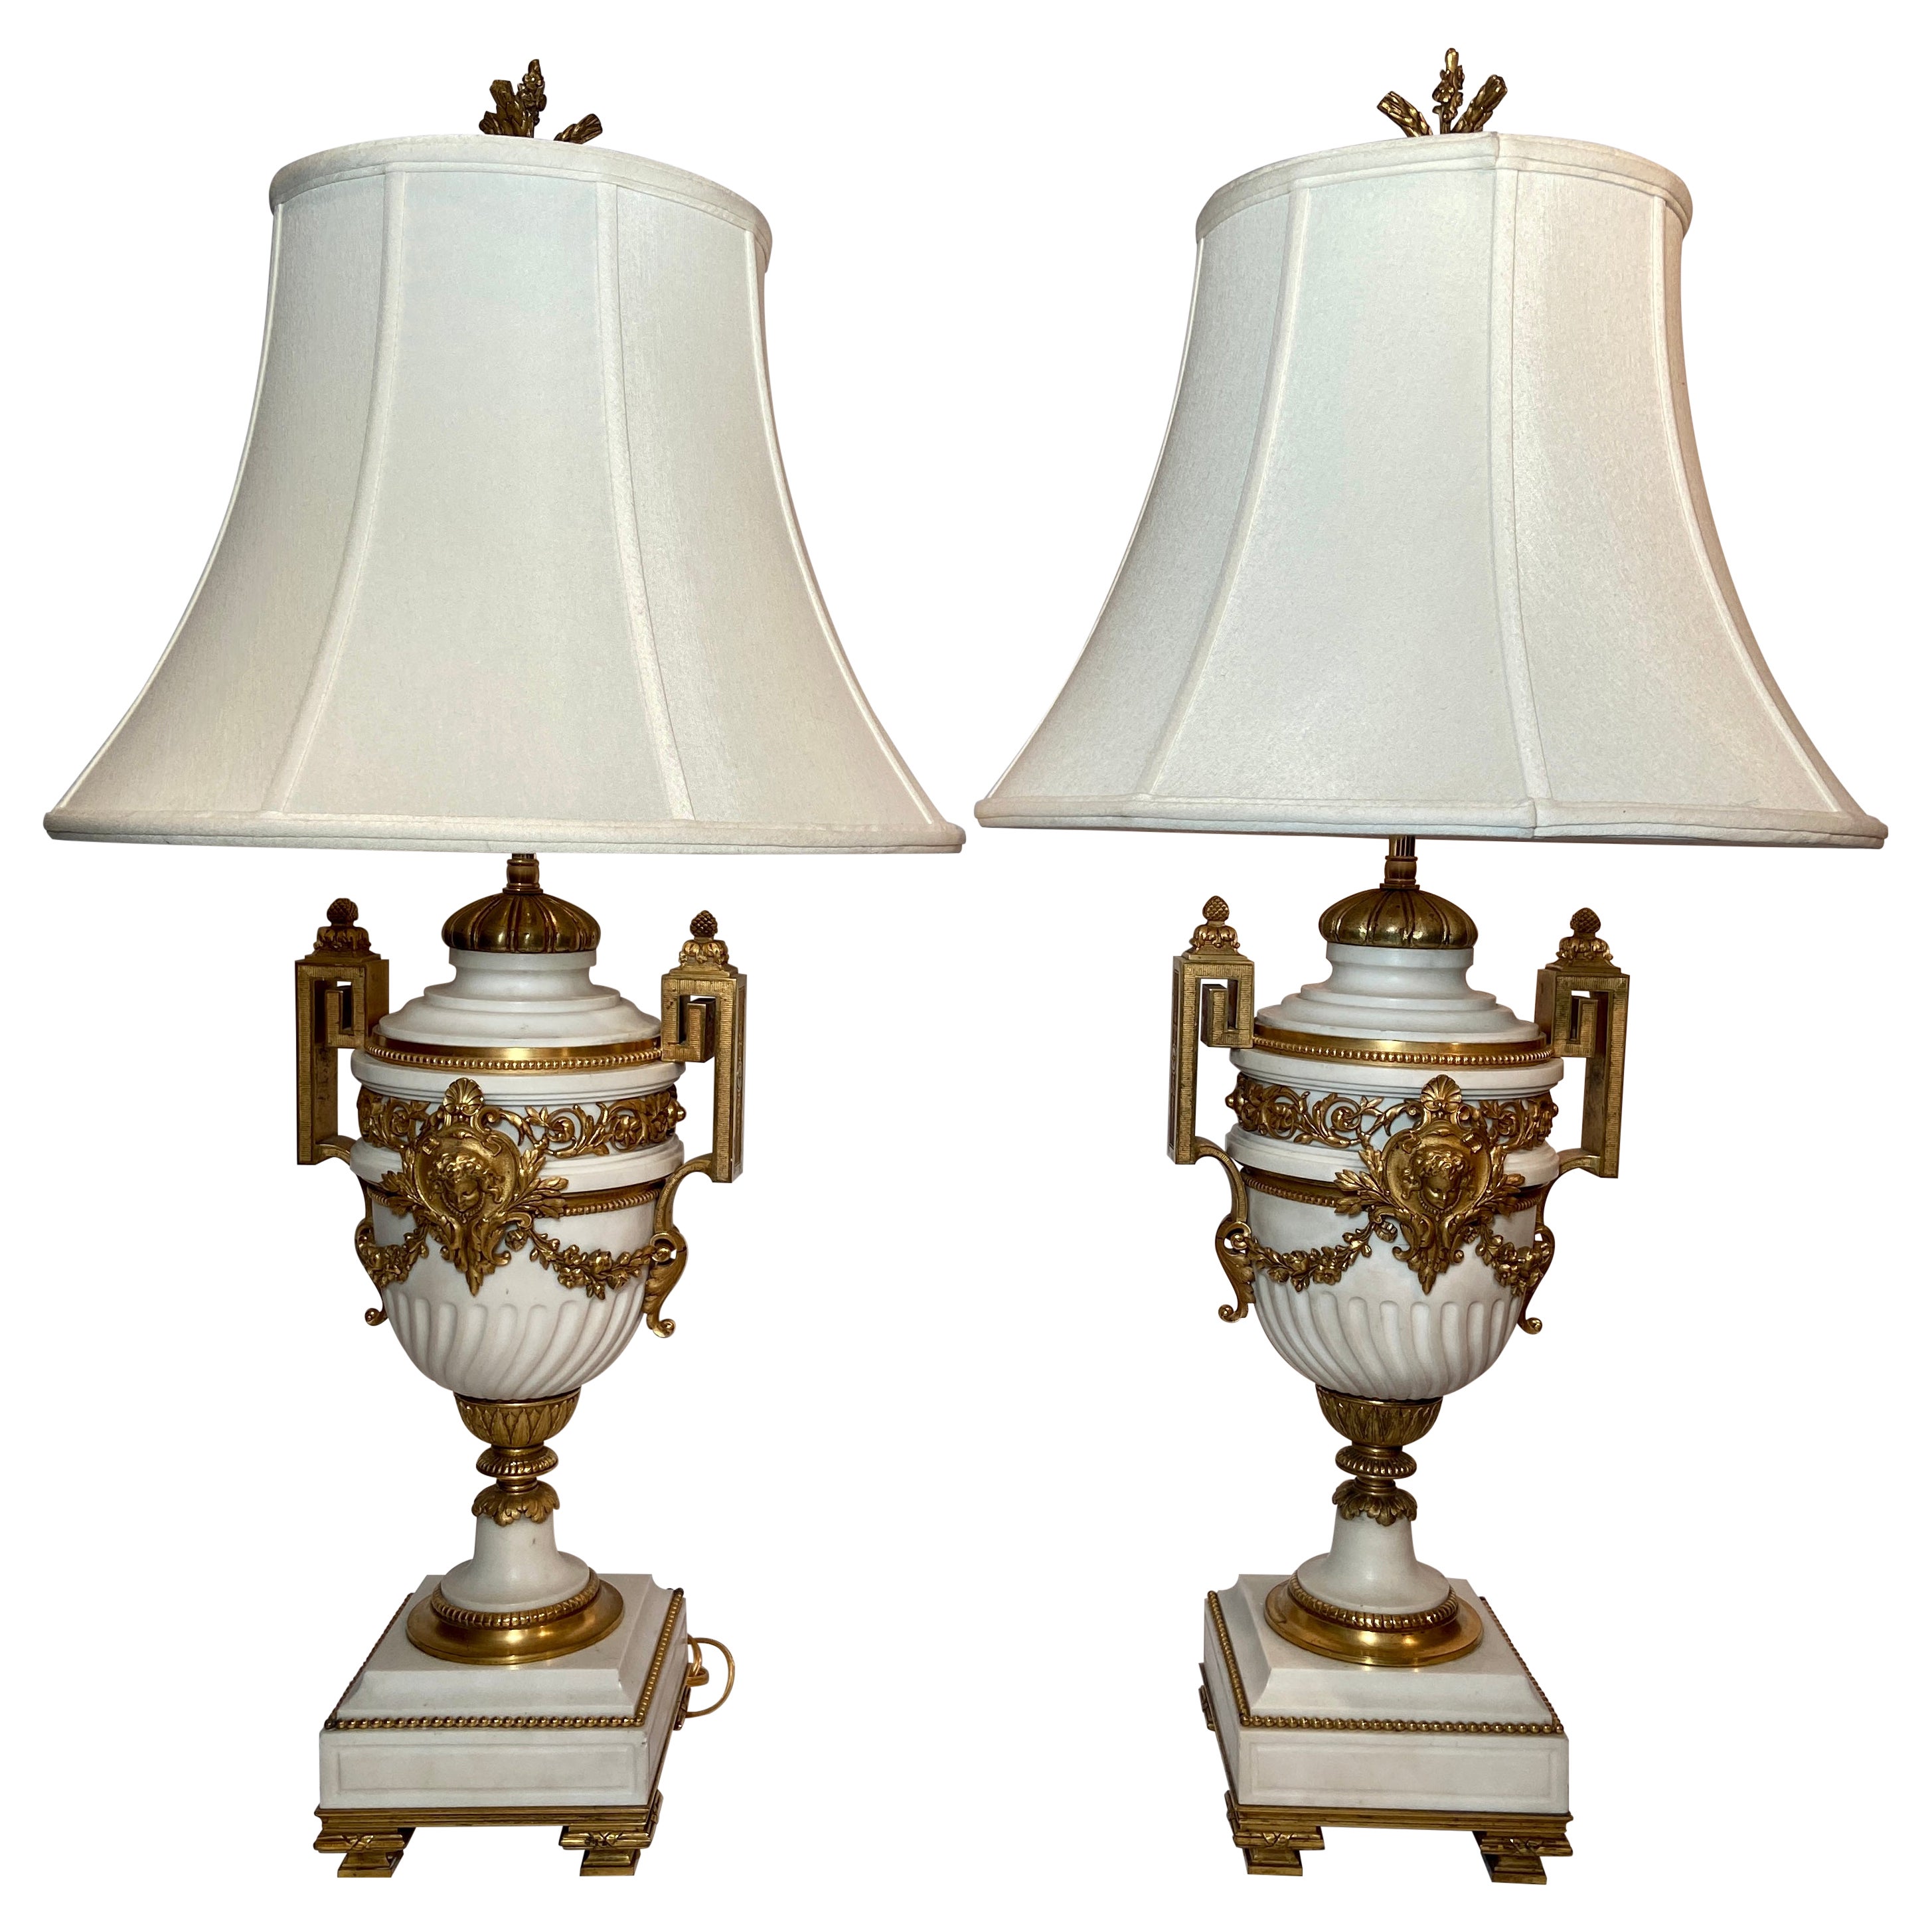 Pair Antique French Louis XVI White Marble and Ormolu Urn Lamps, Circa 1840-1860 For Sale